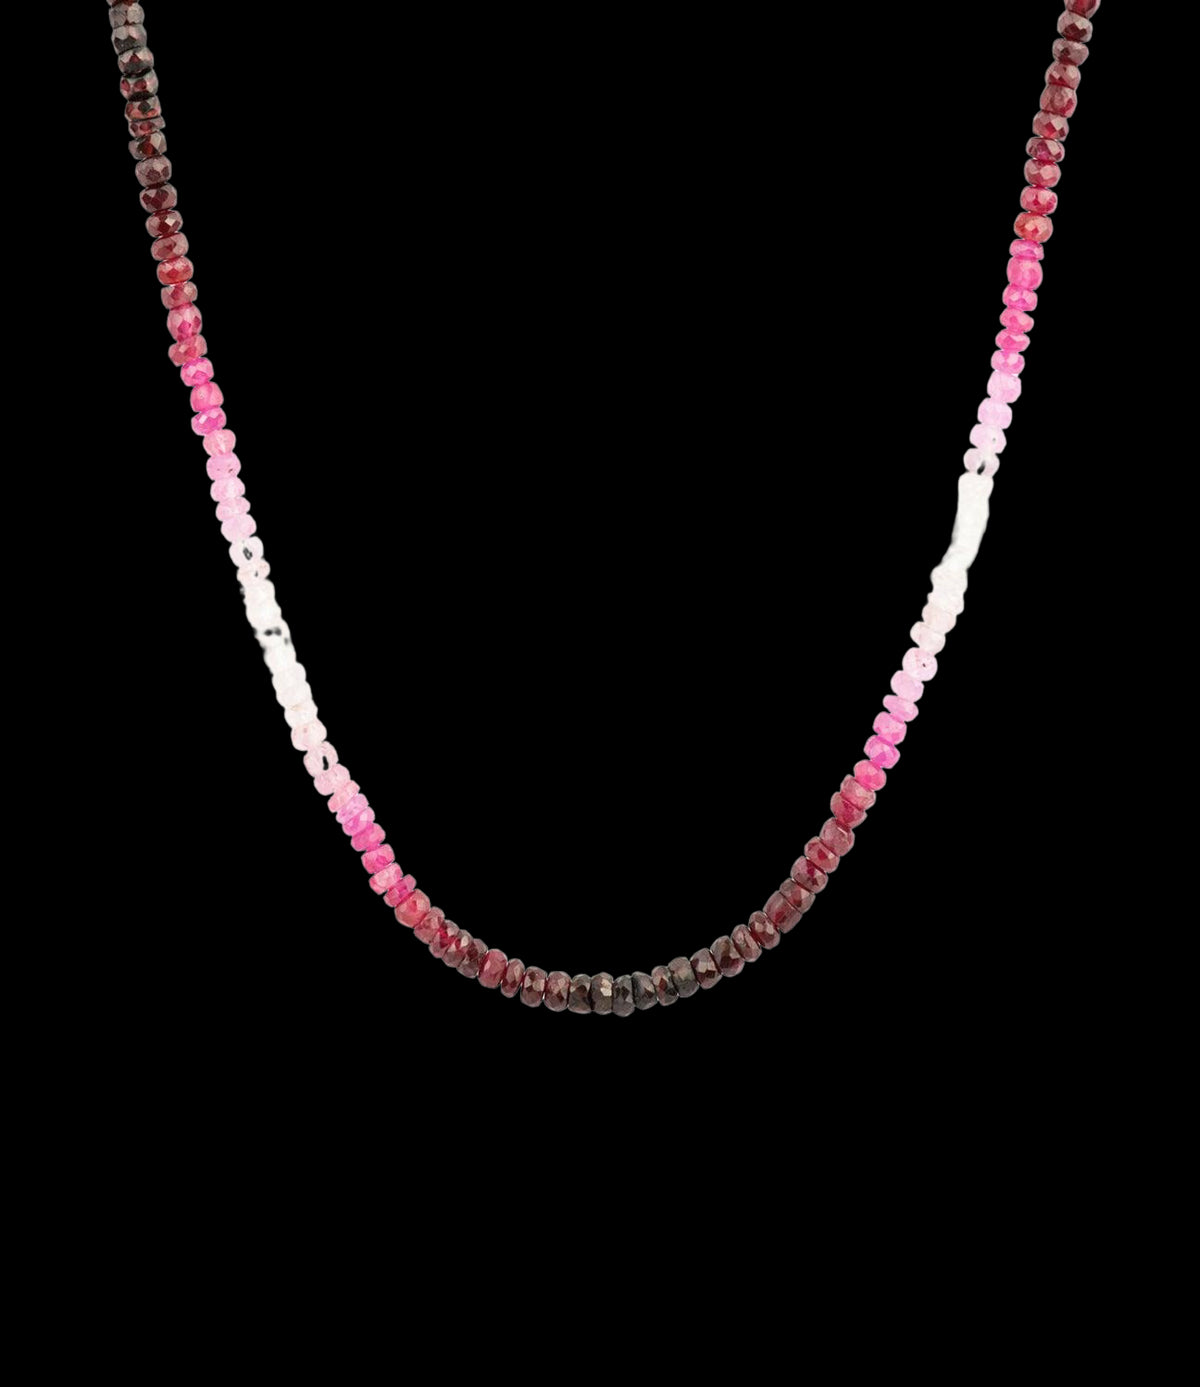 Graduated Ruby Necklace